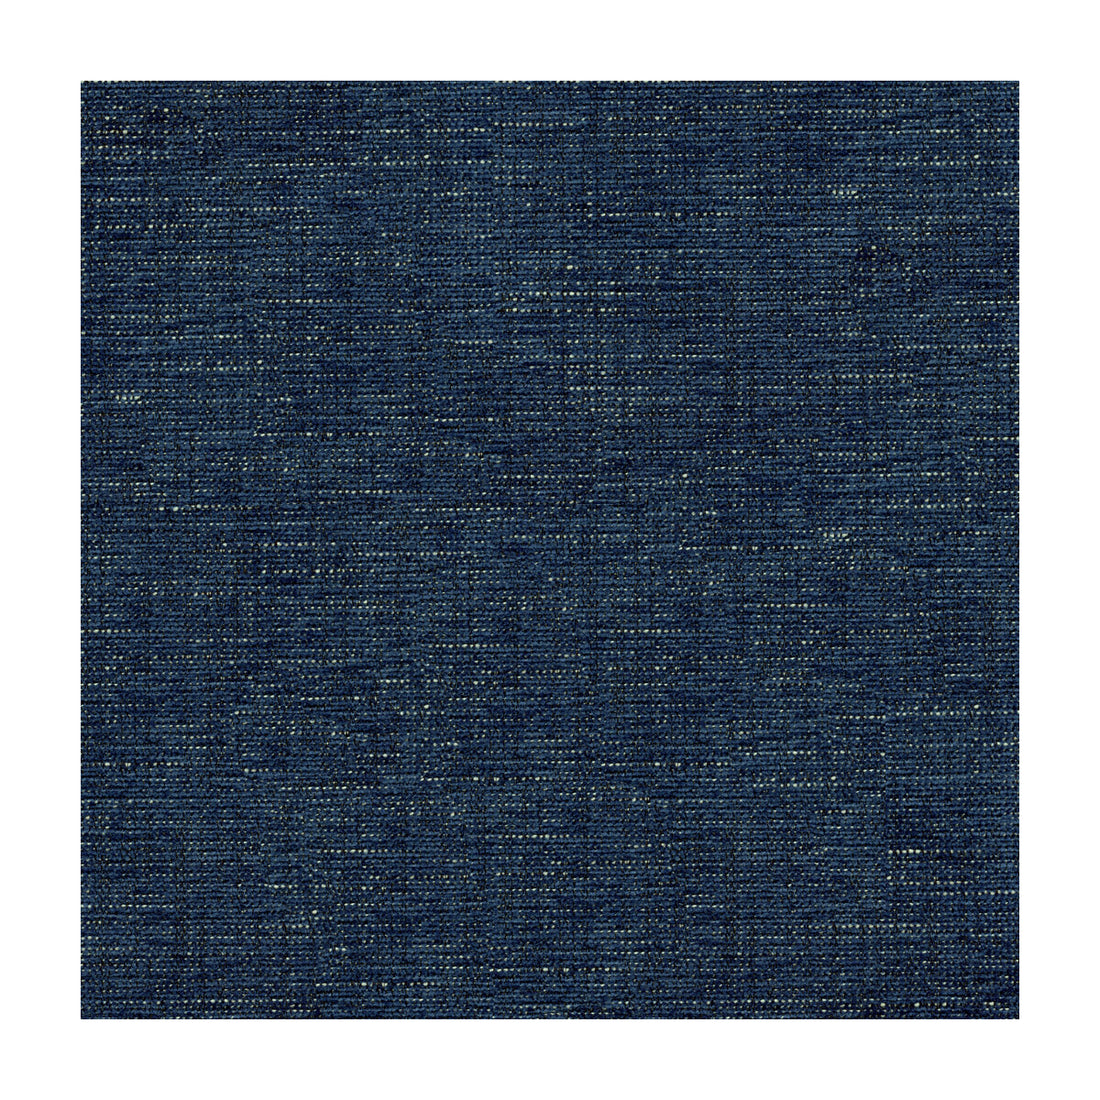 Beacon fabric in indigo color - pattern 34182.50.0 - by Kravet Contract in the Crypton Incase collection